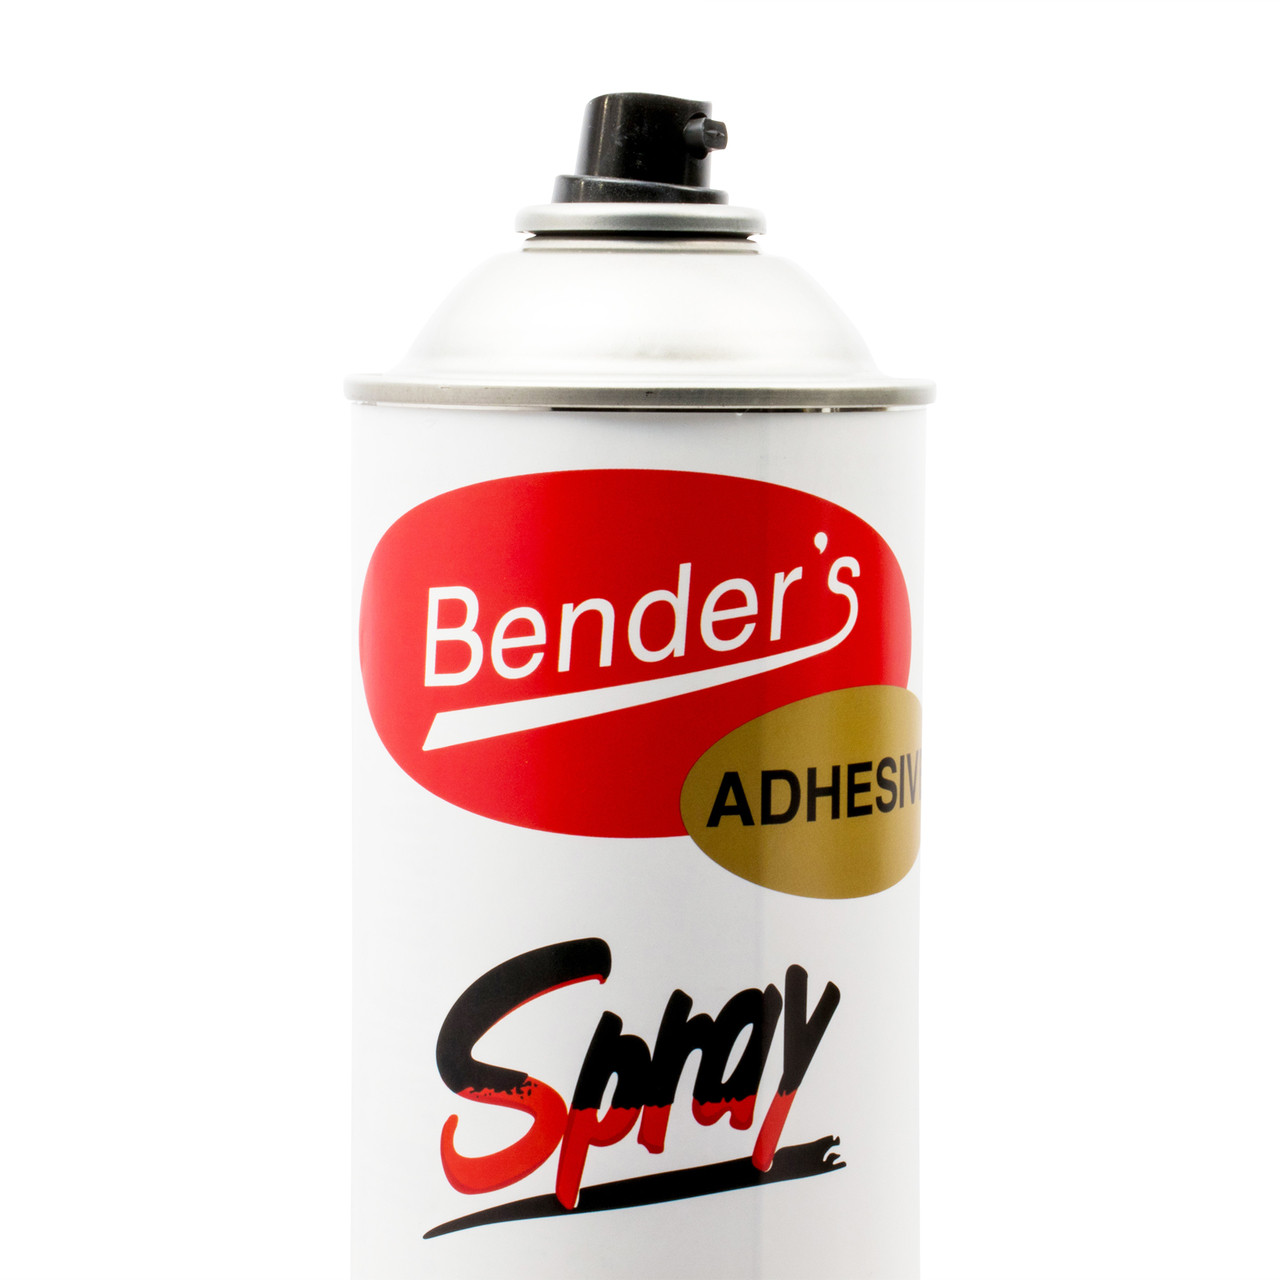 Best Headliner Adhesive Reviews & Recommendations